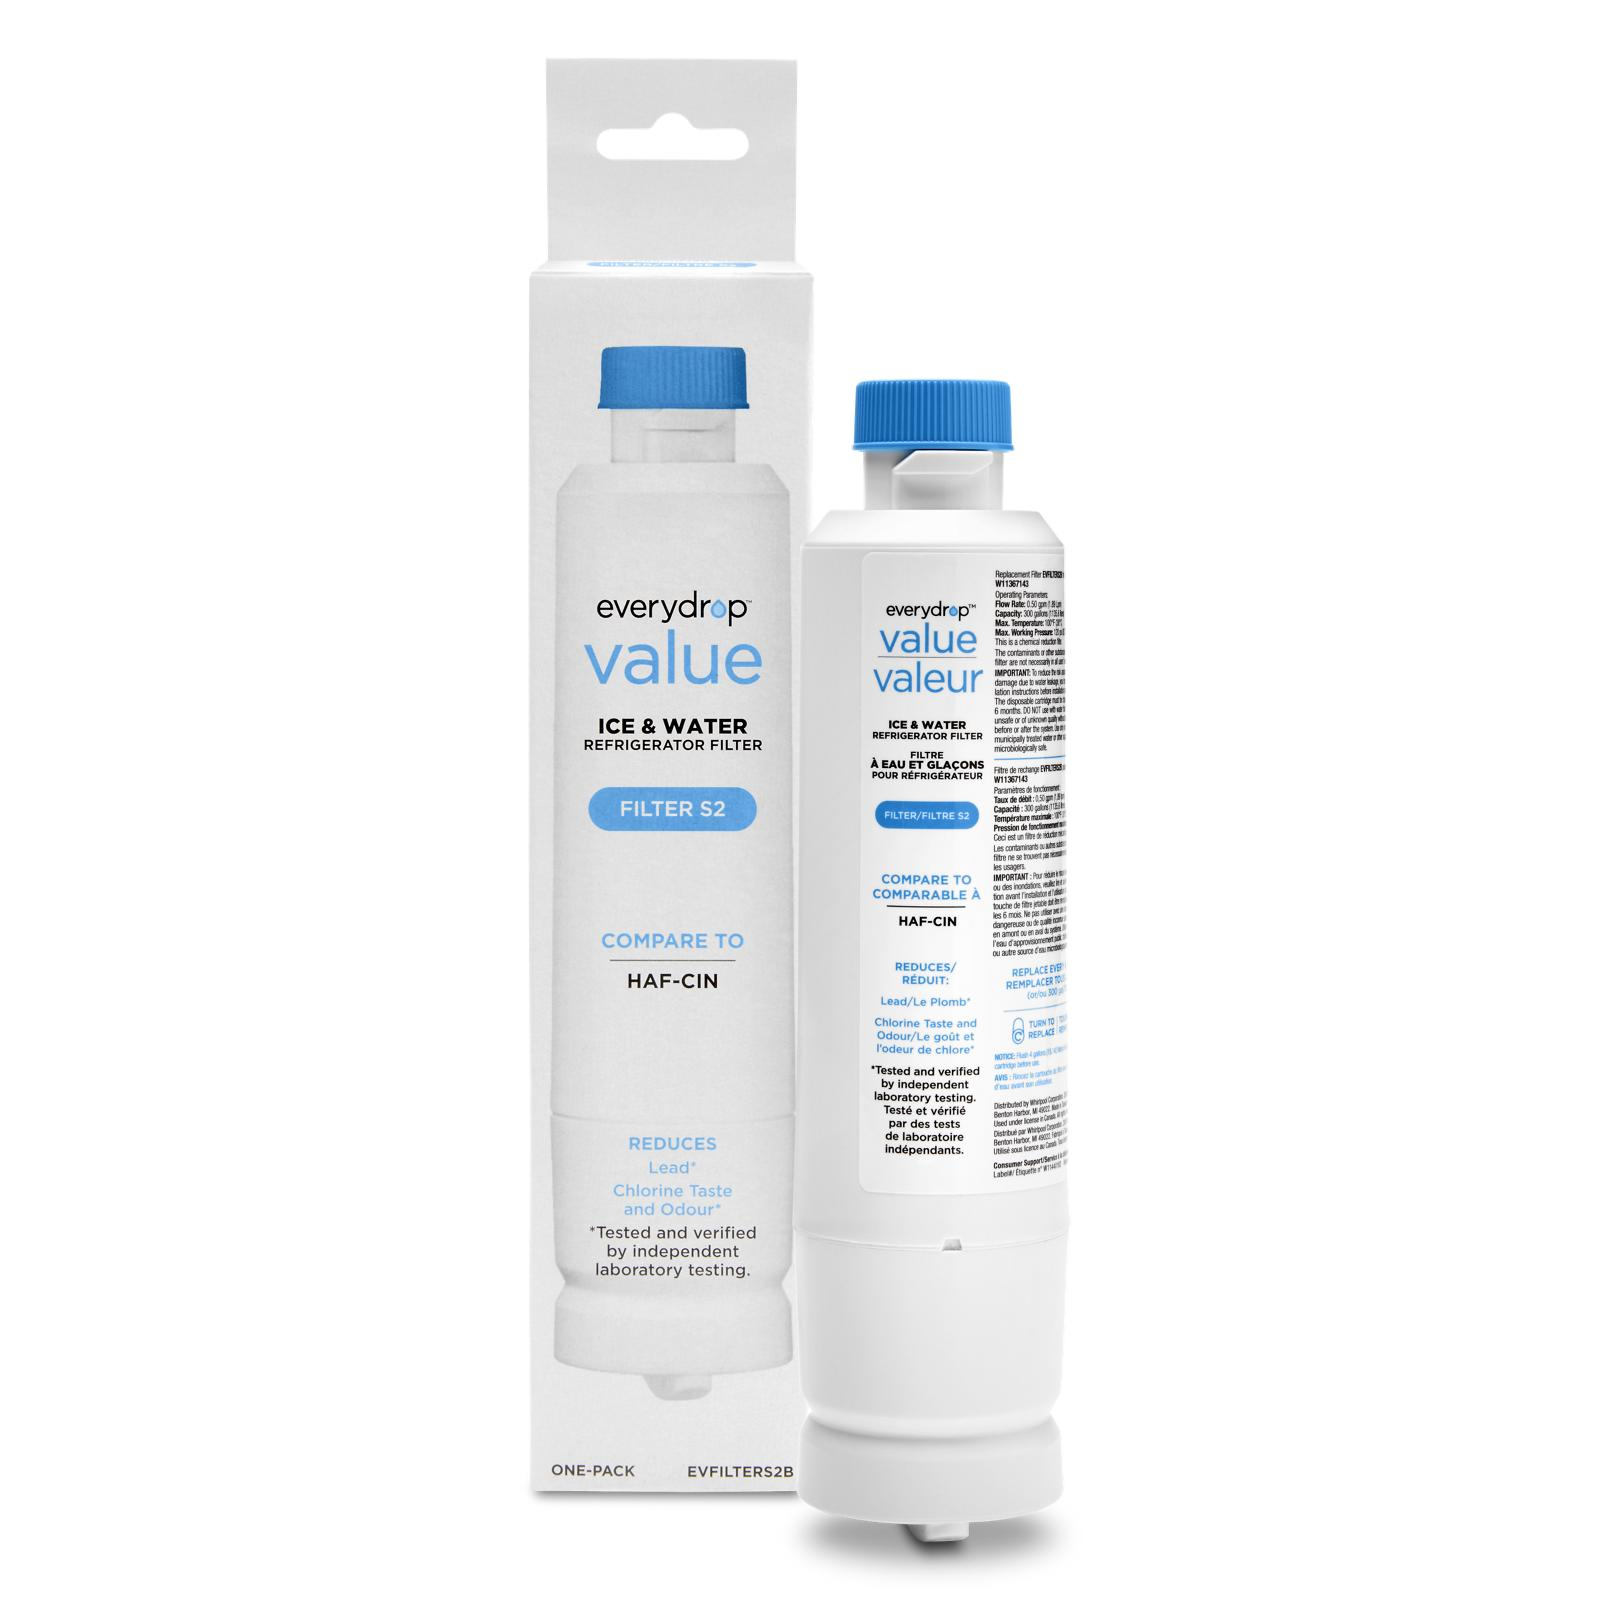 Whirlpool Refrigerator Water Filter S2 (compares to Samsung HAF-CIN) - EVFILTERS2B